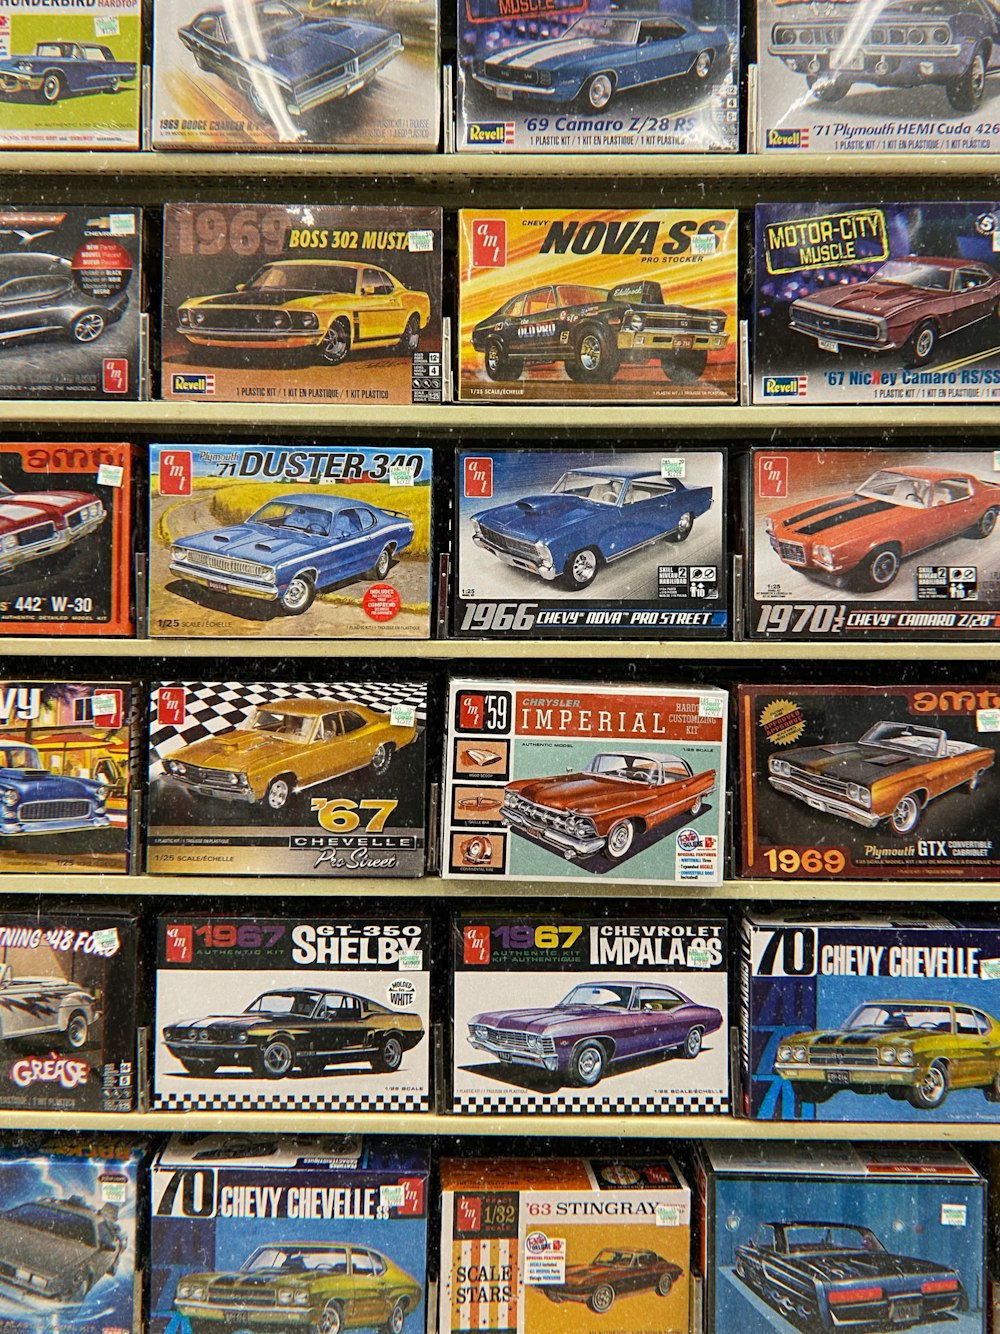 blue and white car die cast model collection